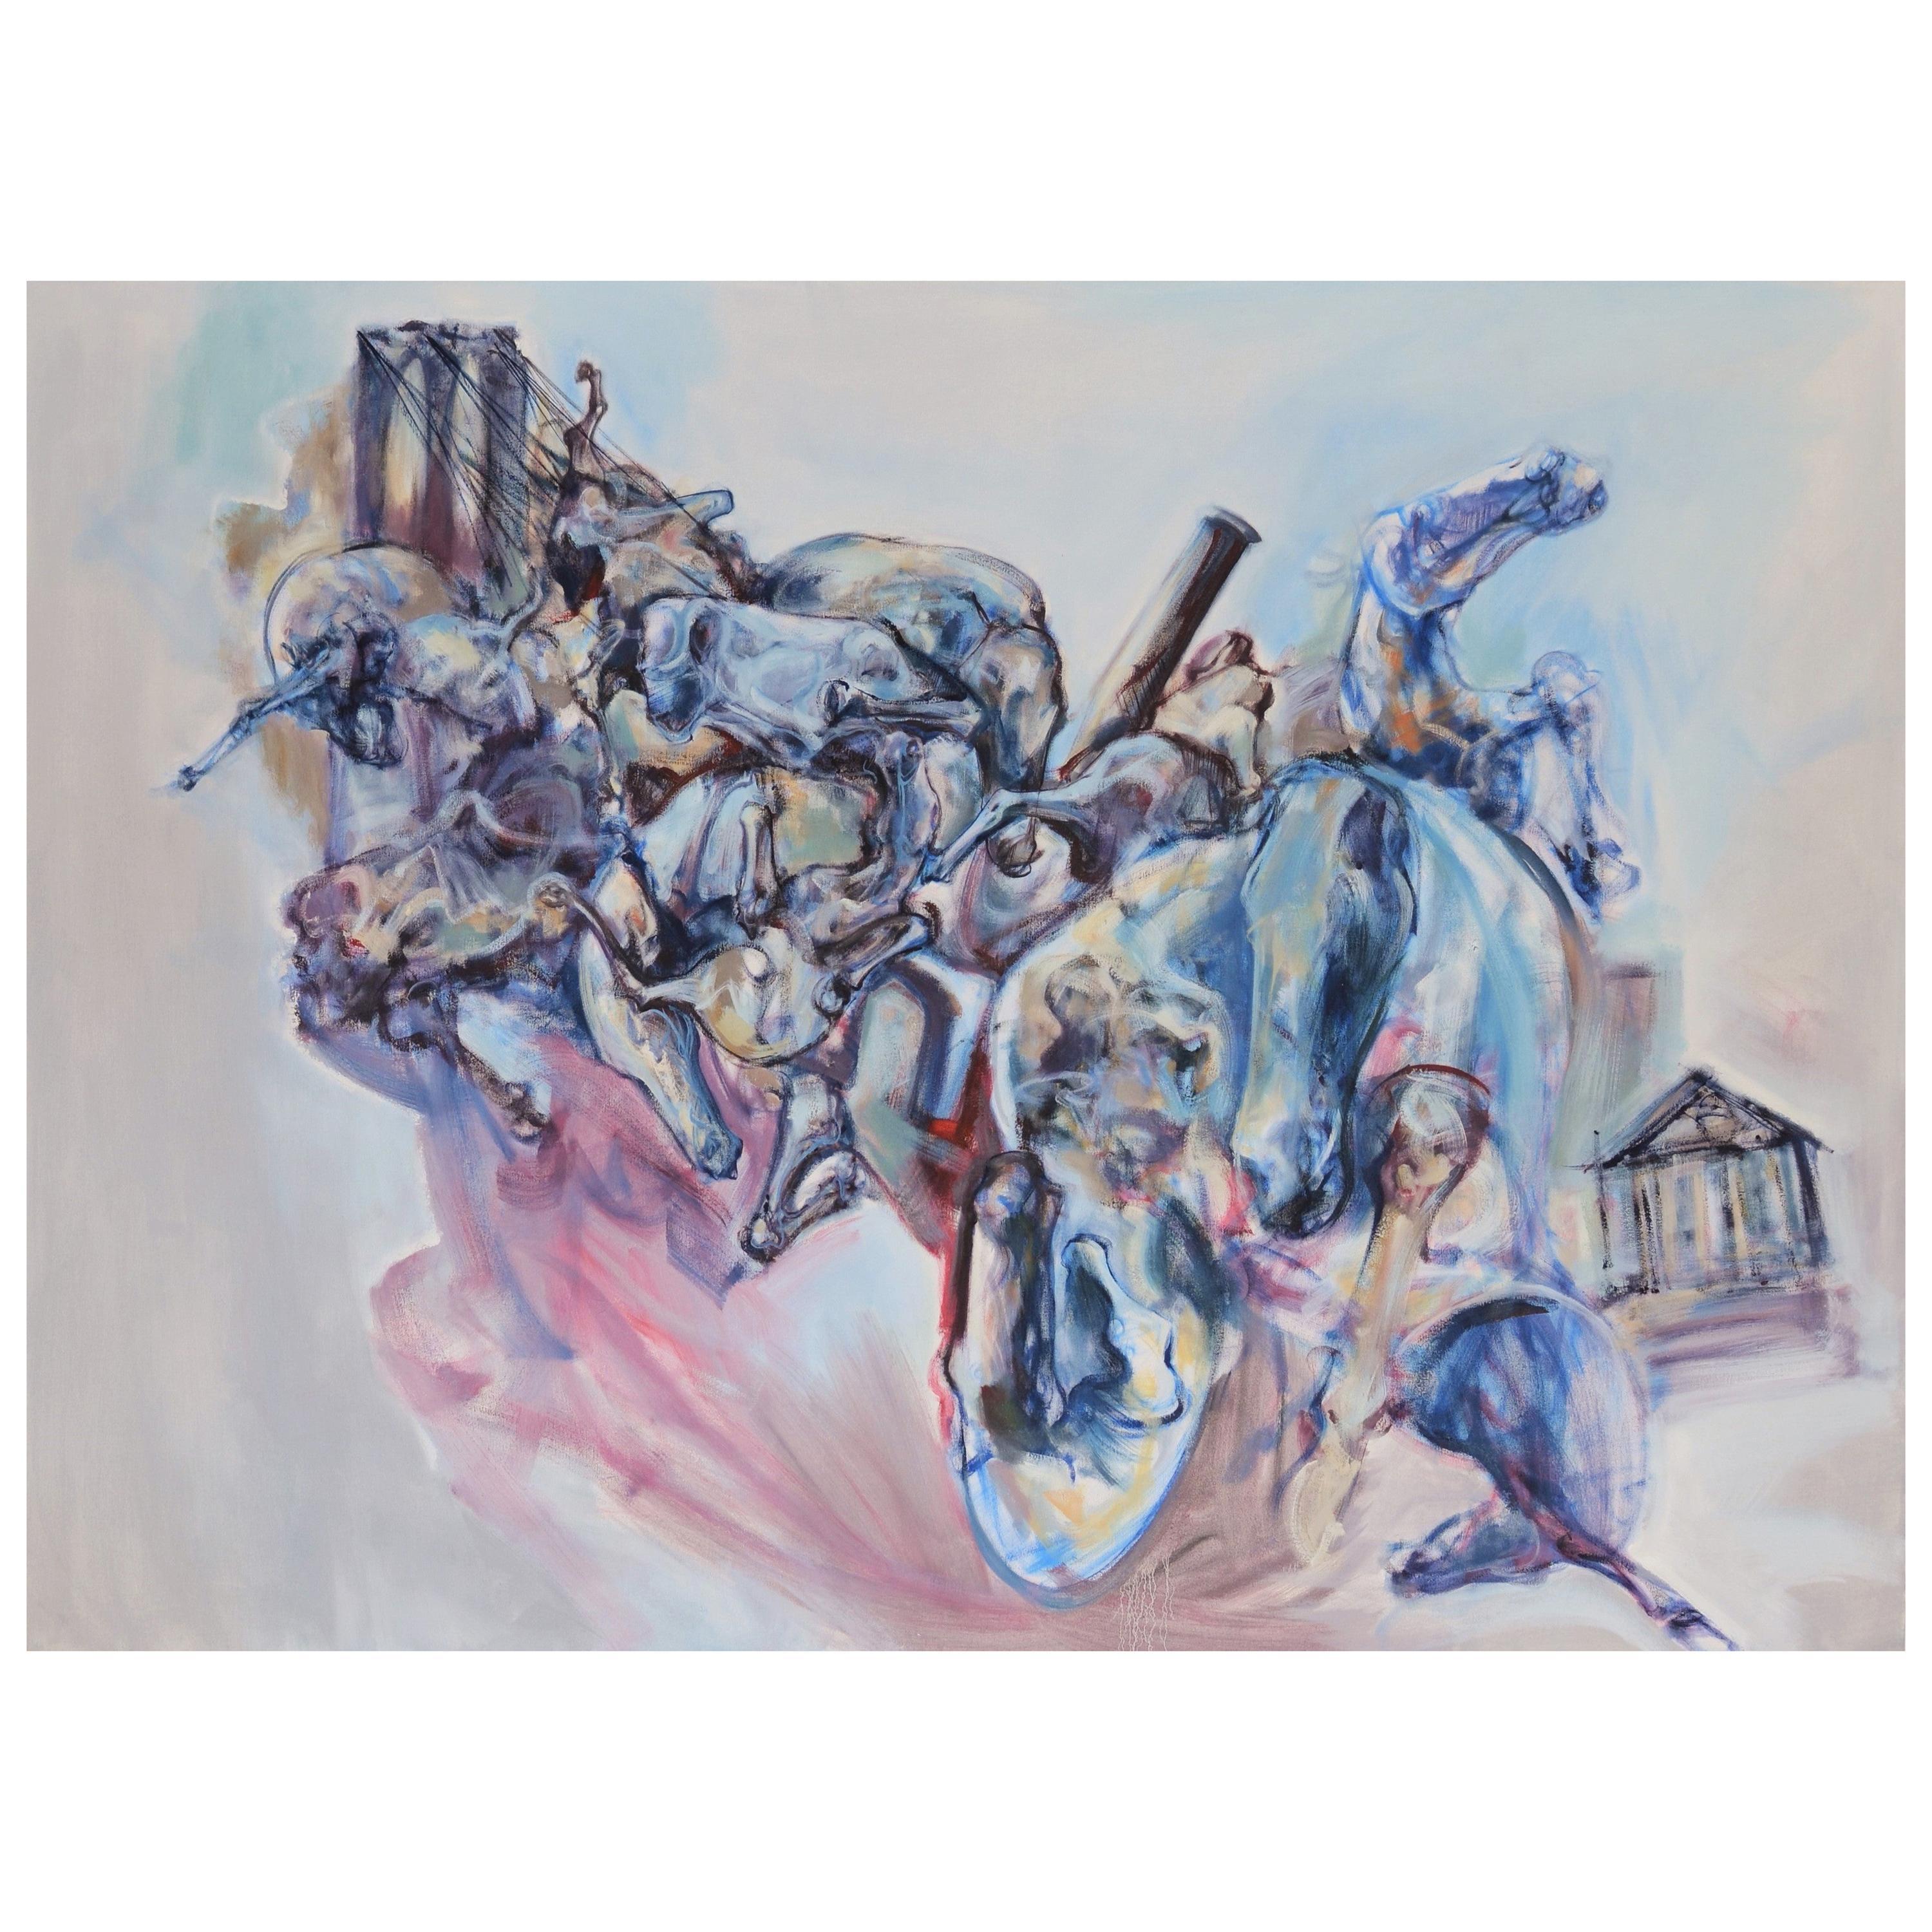 A large abstract oil on canvas painting titled " Three Cities" by the contemporary artist Igor Bogojevic ( Montenegro Born in 1980 ). The Painting features horses which has been Igor's signature work since the Start of his career. In a blue, pink